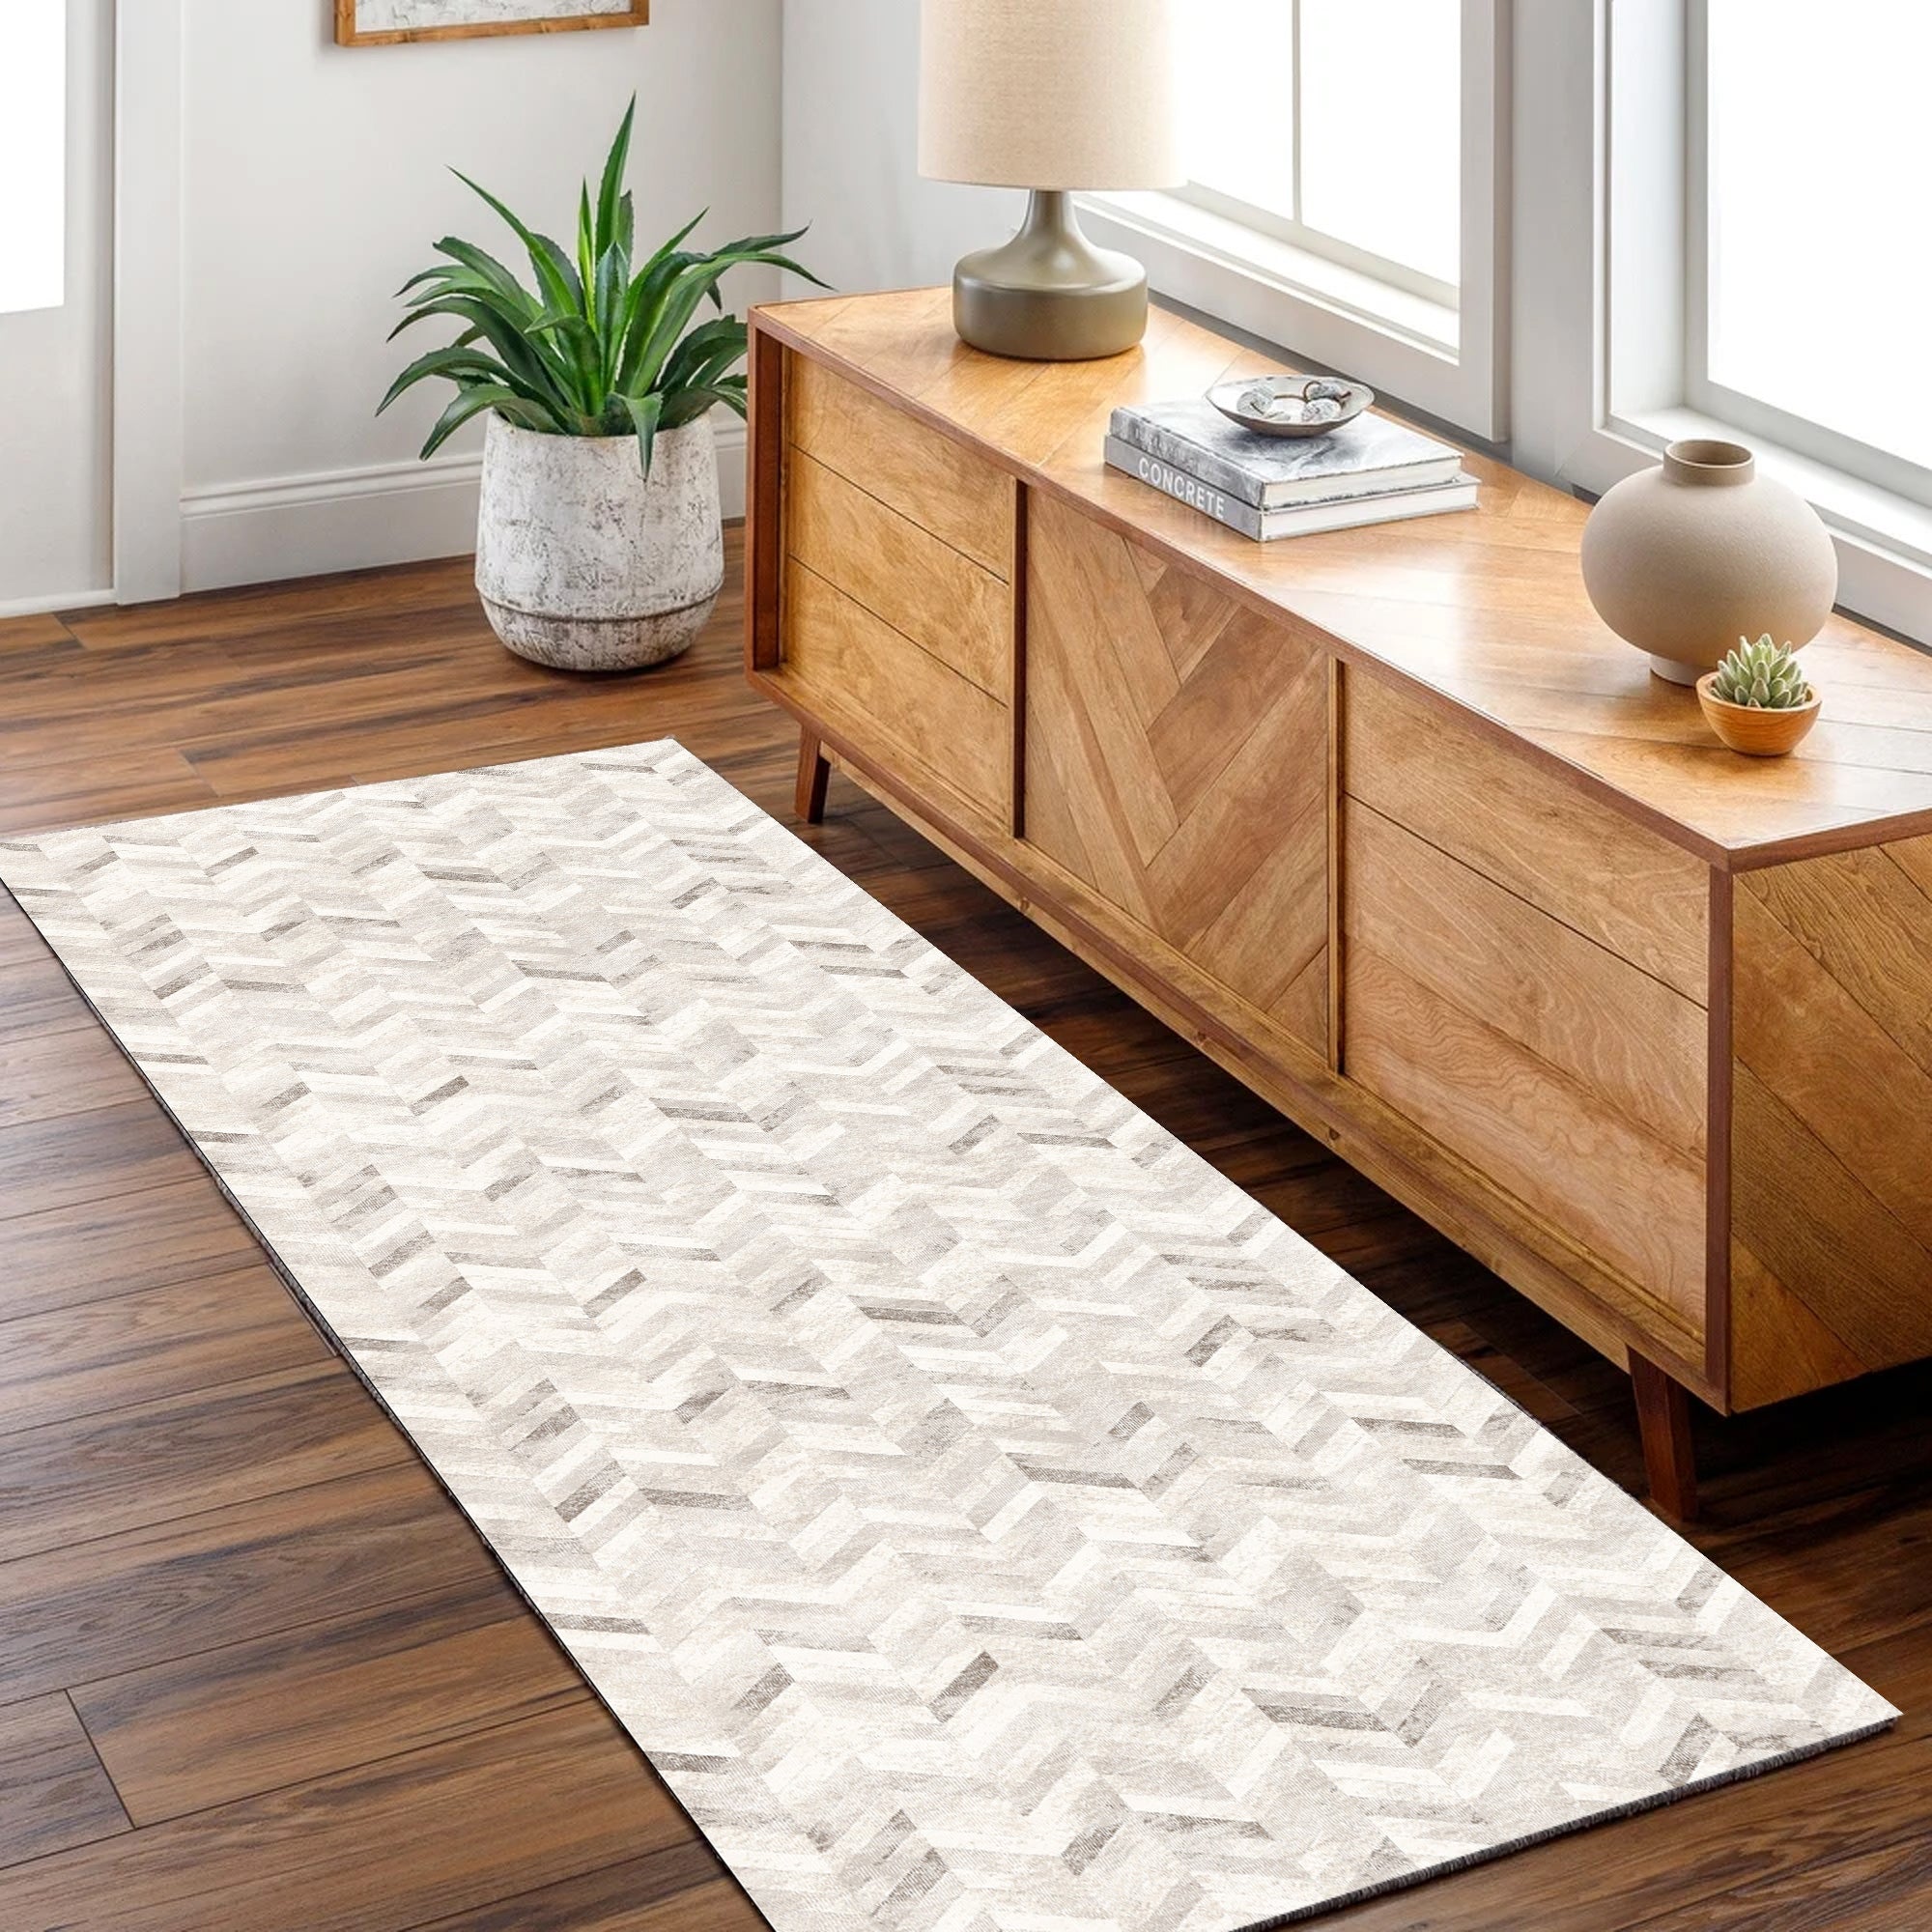 Runner rugs by Rugs a Million.